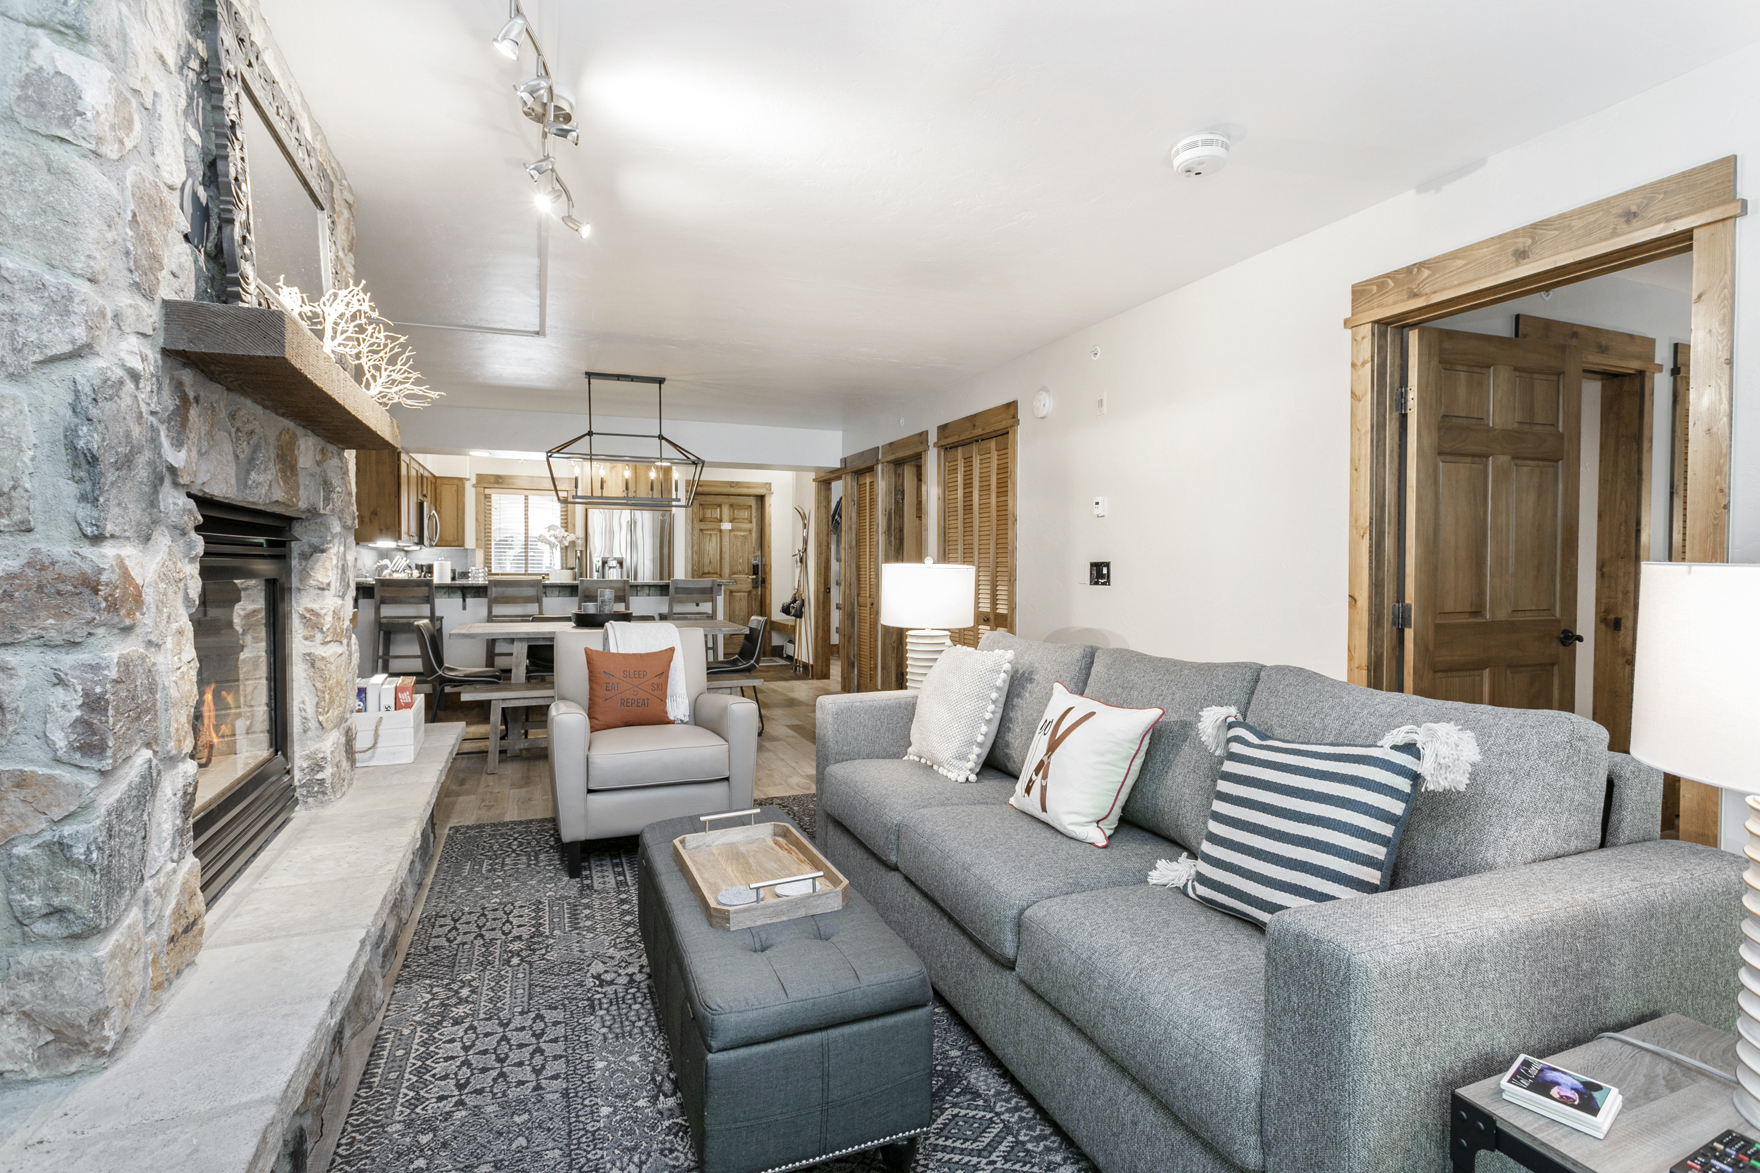 Antlers guests find spacious, beautifully appointed home-away-from-home accommodation in condominiums with full kitchens, gas fireplaces, private balconies and more.